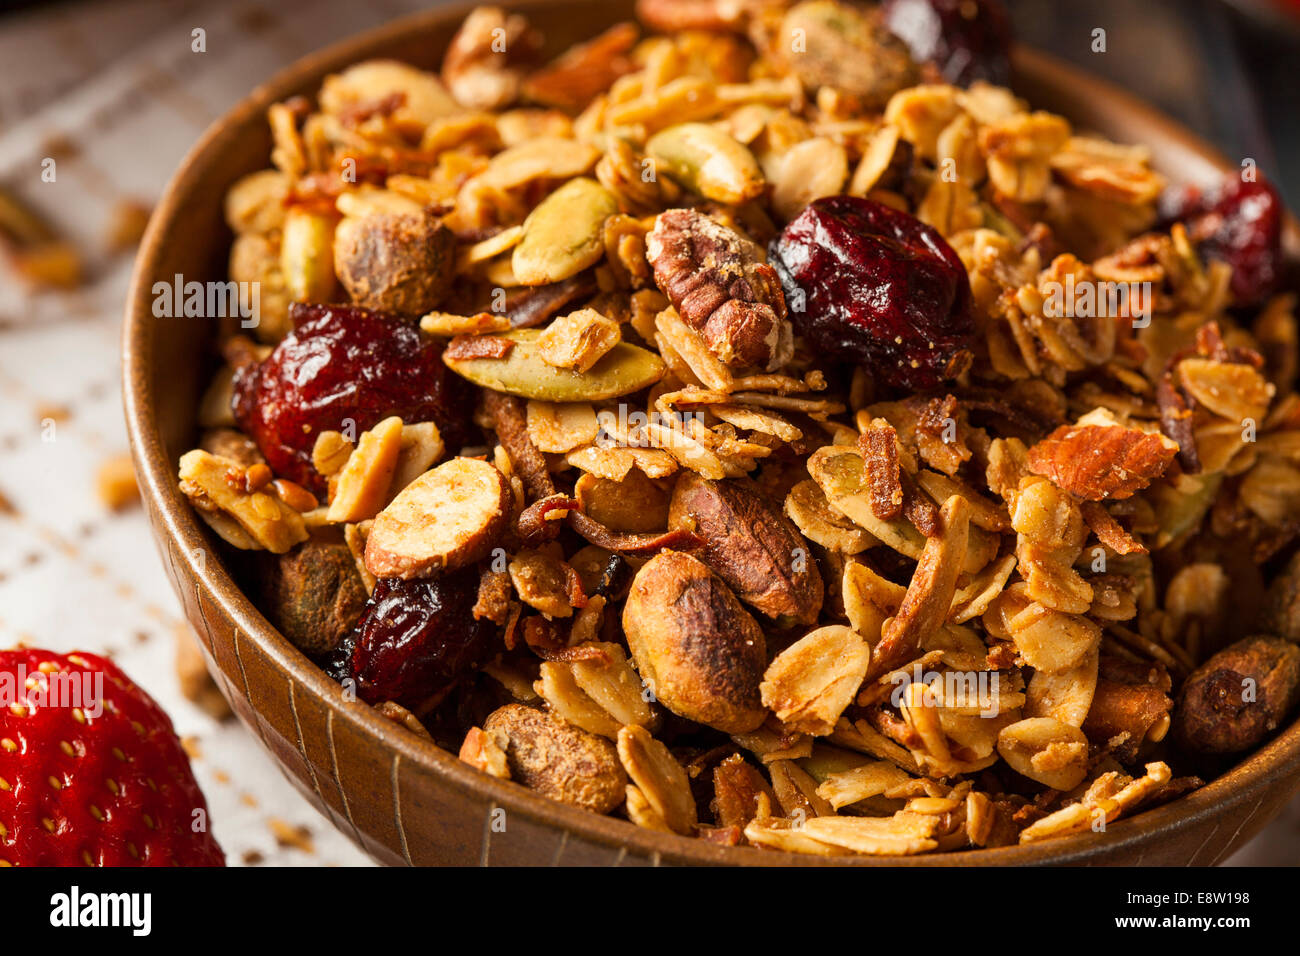 Healthy Homemade Granola with Nuts and Dried Cranberries Stock Photo